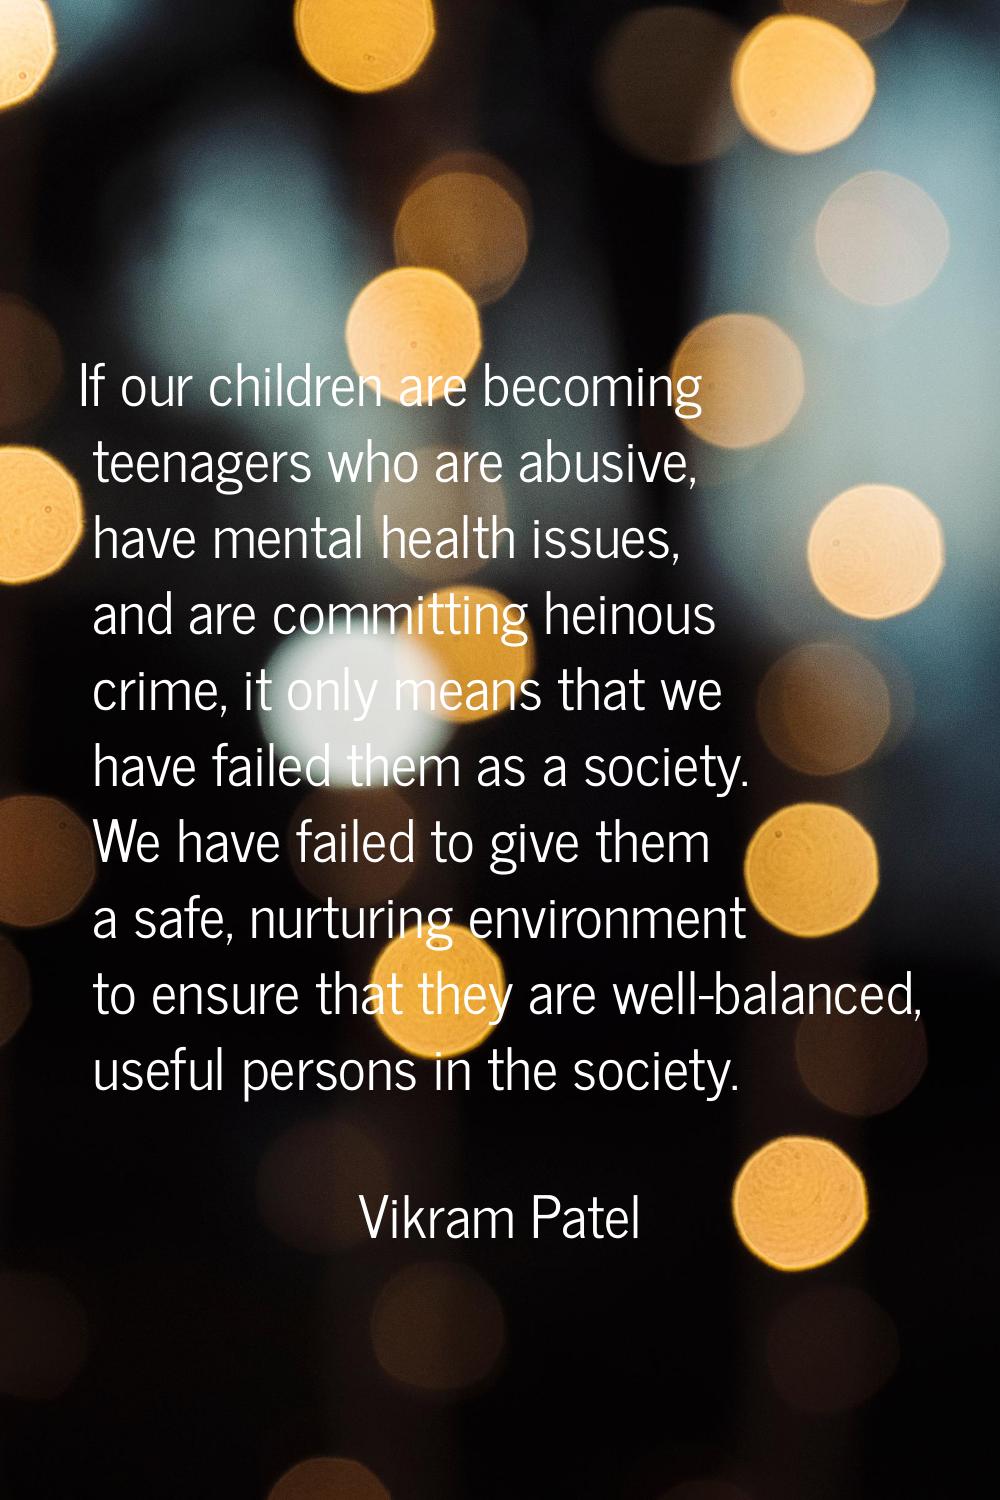 If our children are becoming teenagers who are abusive, have mental health issues, and are committi